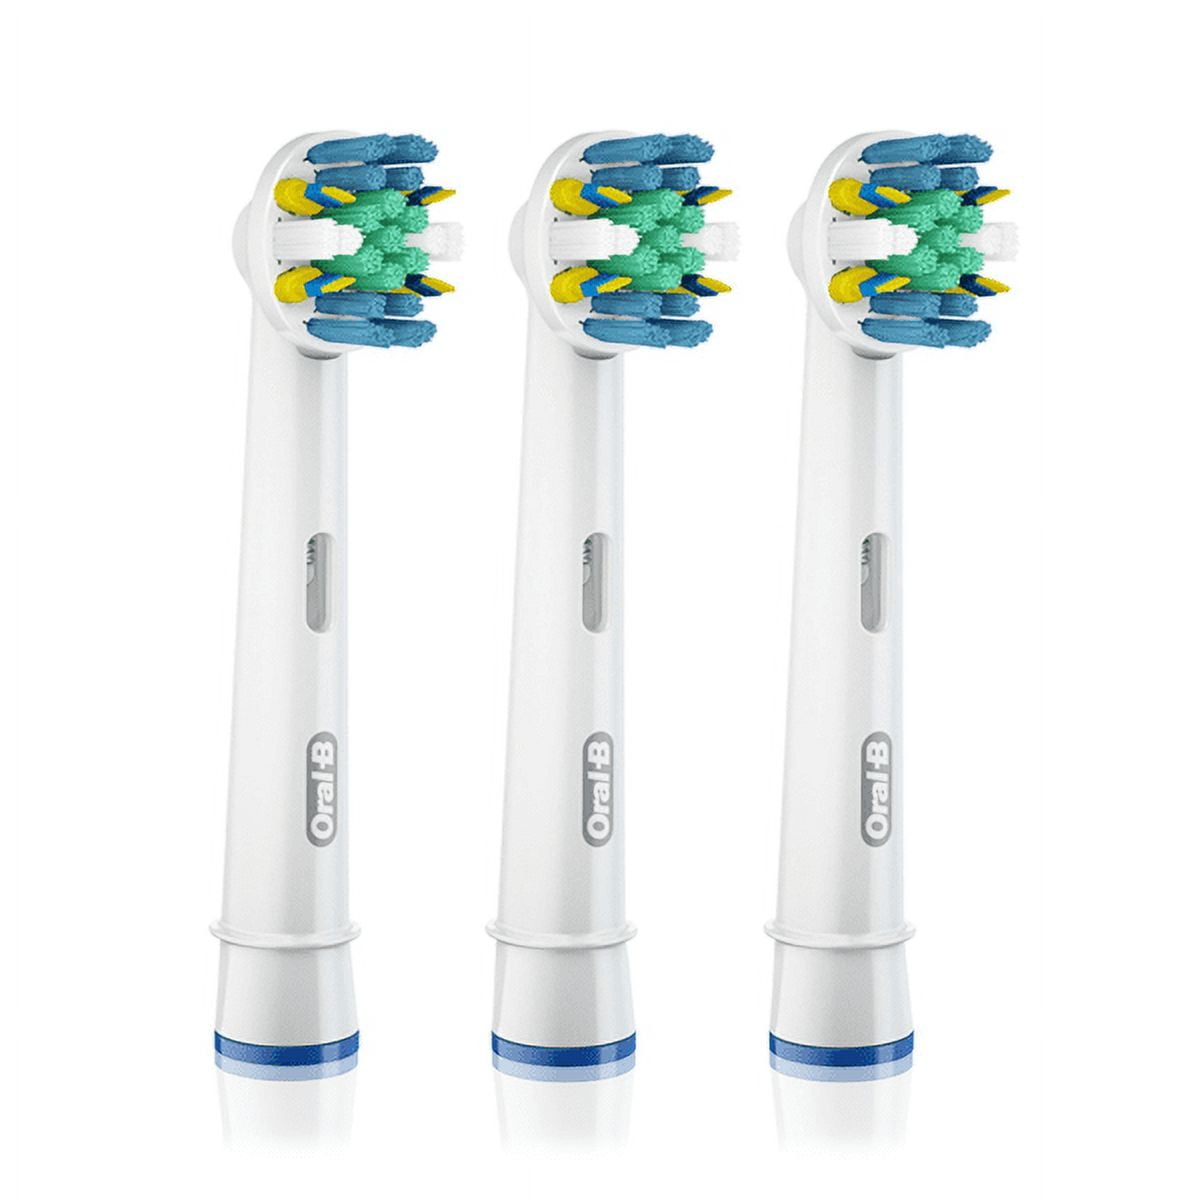 Oral-B Complete Battery Power Replacement Brush Heads 2 ct Carded Pack